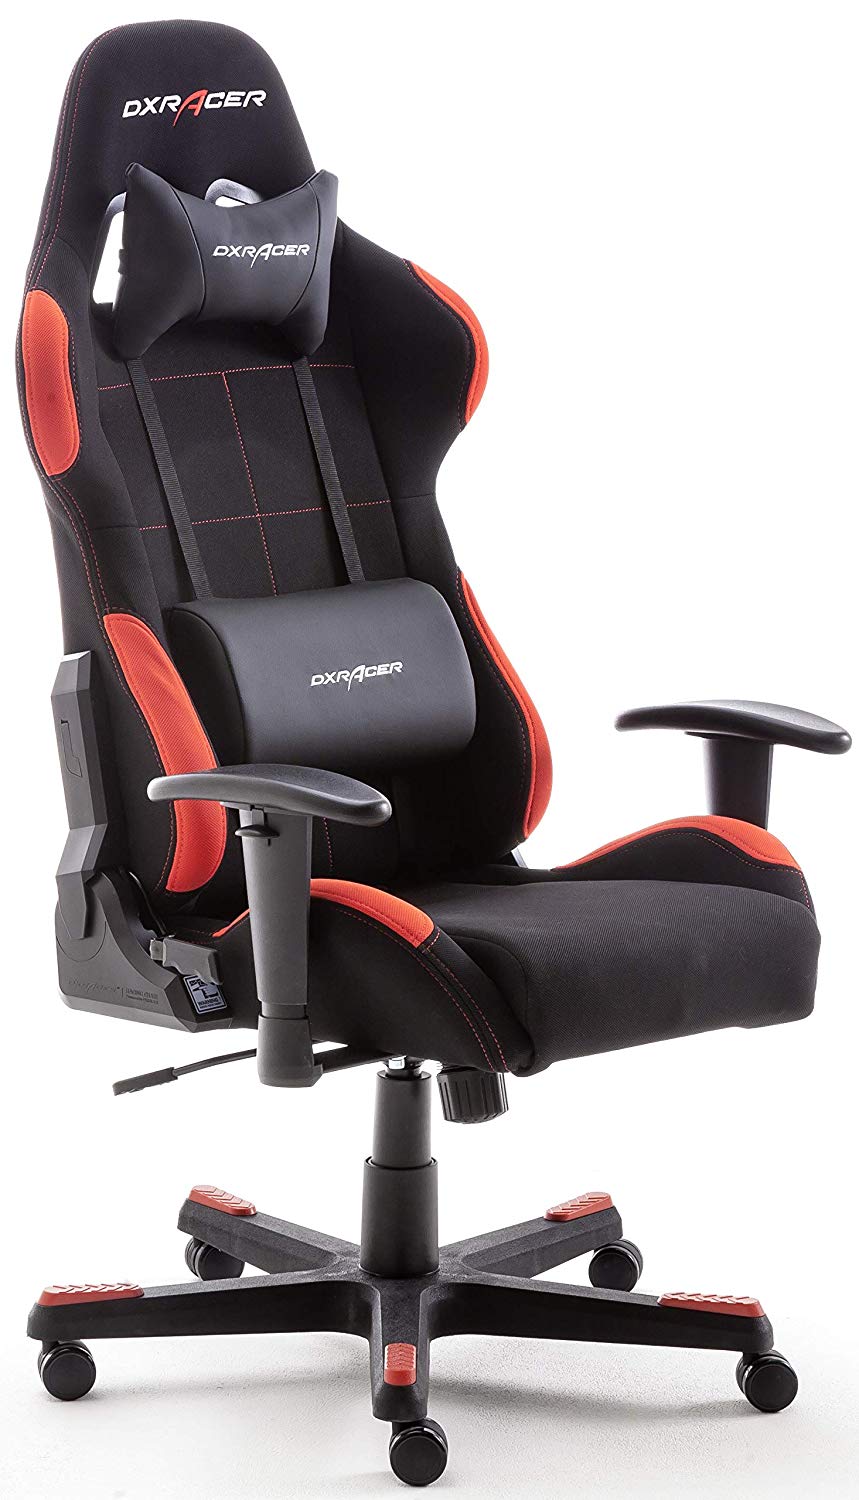 Silla Gaming DX Racer solo 159,6€